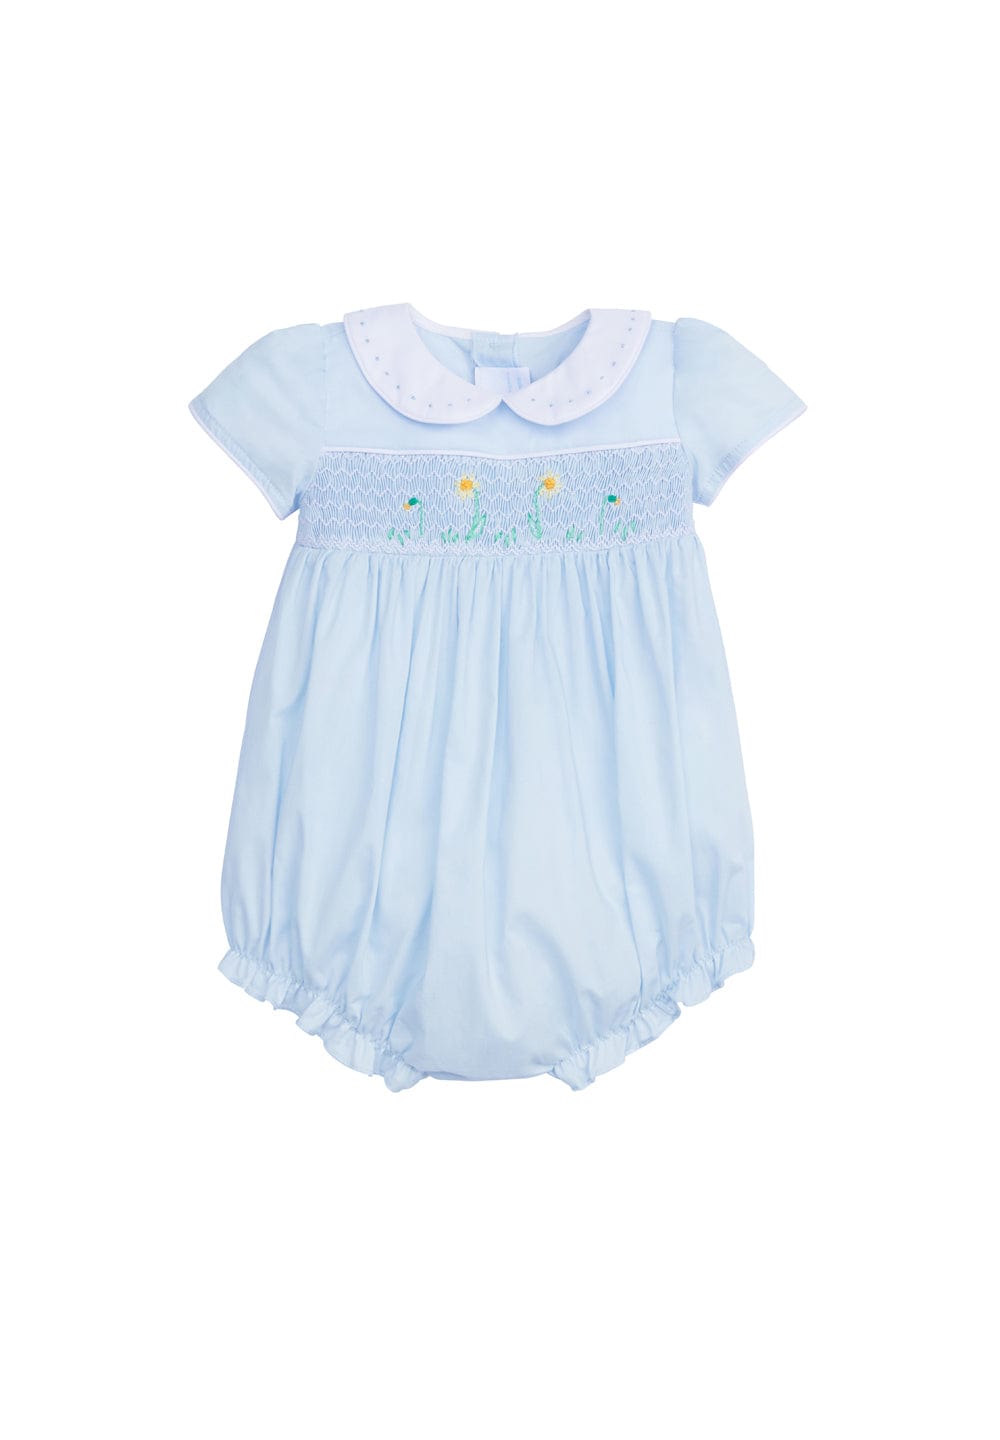 seguridadindustrialcr clothing girls light blue bubble with peter pan collar and daffodil smocking detail on chest